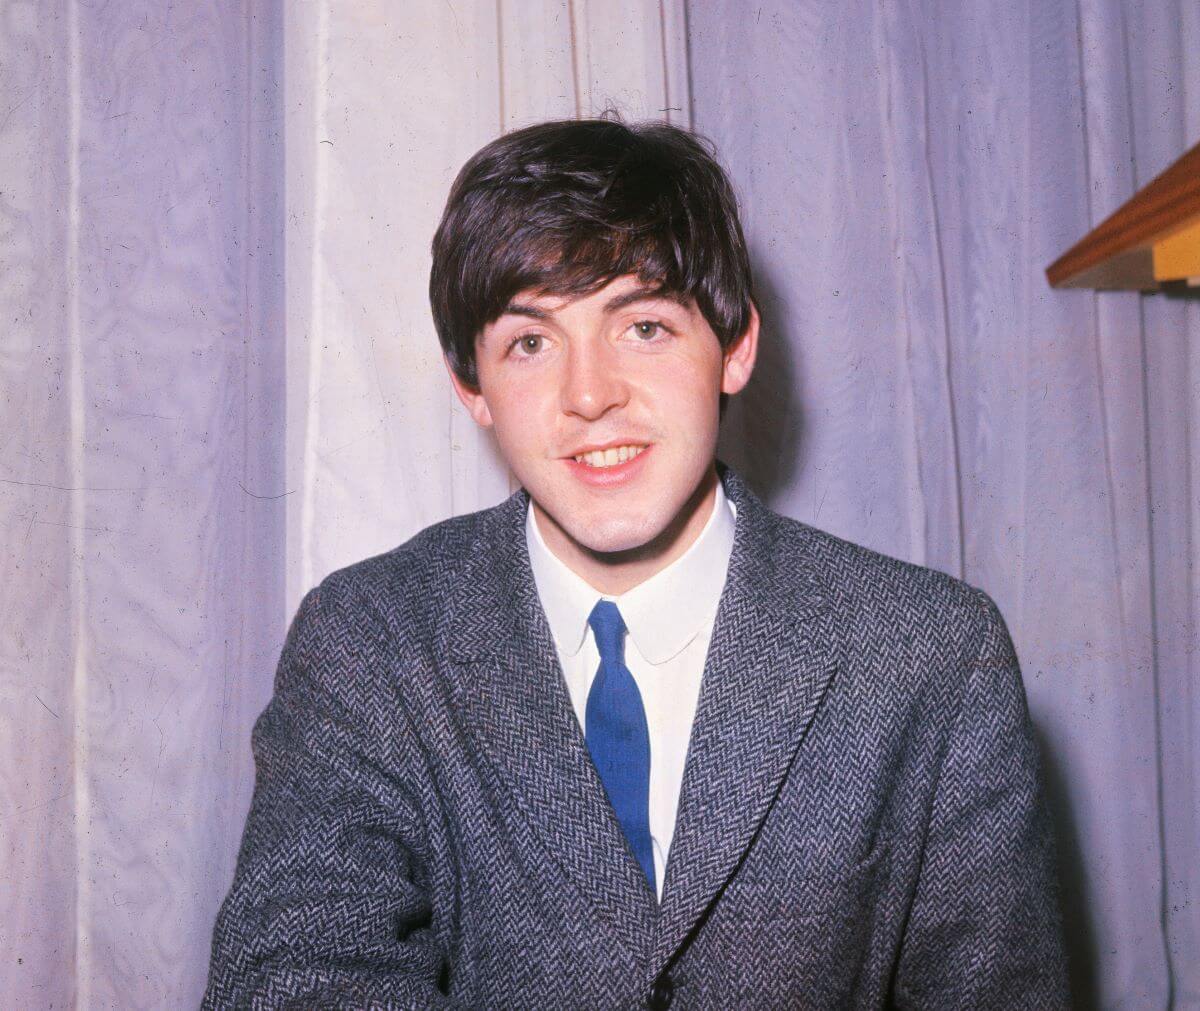 Paul McCartney wears a blue suit and sits in front of a curtain.